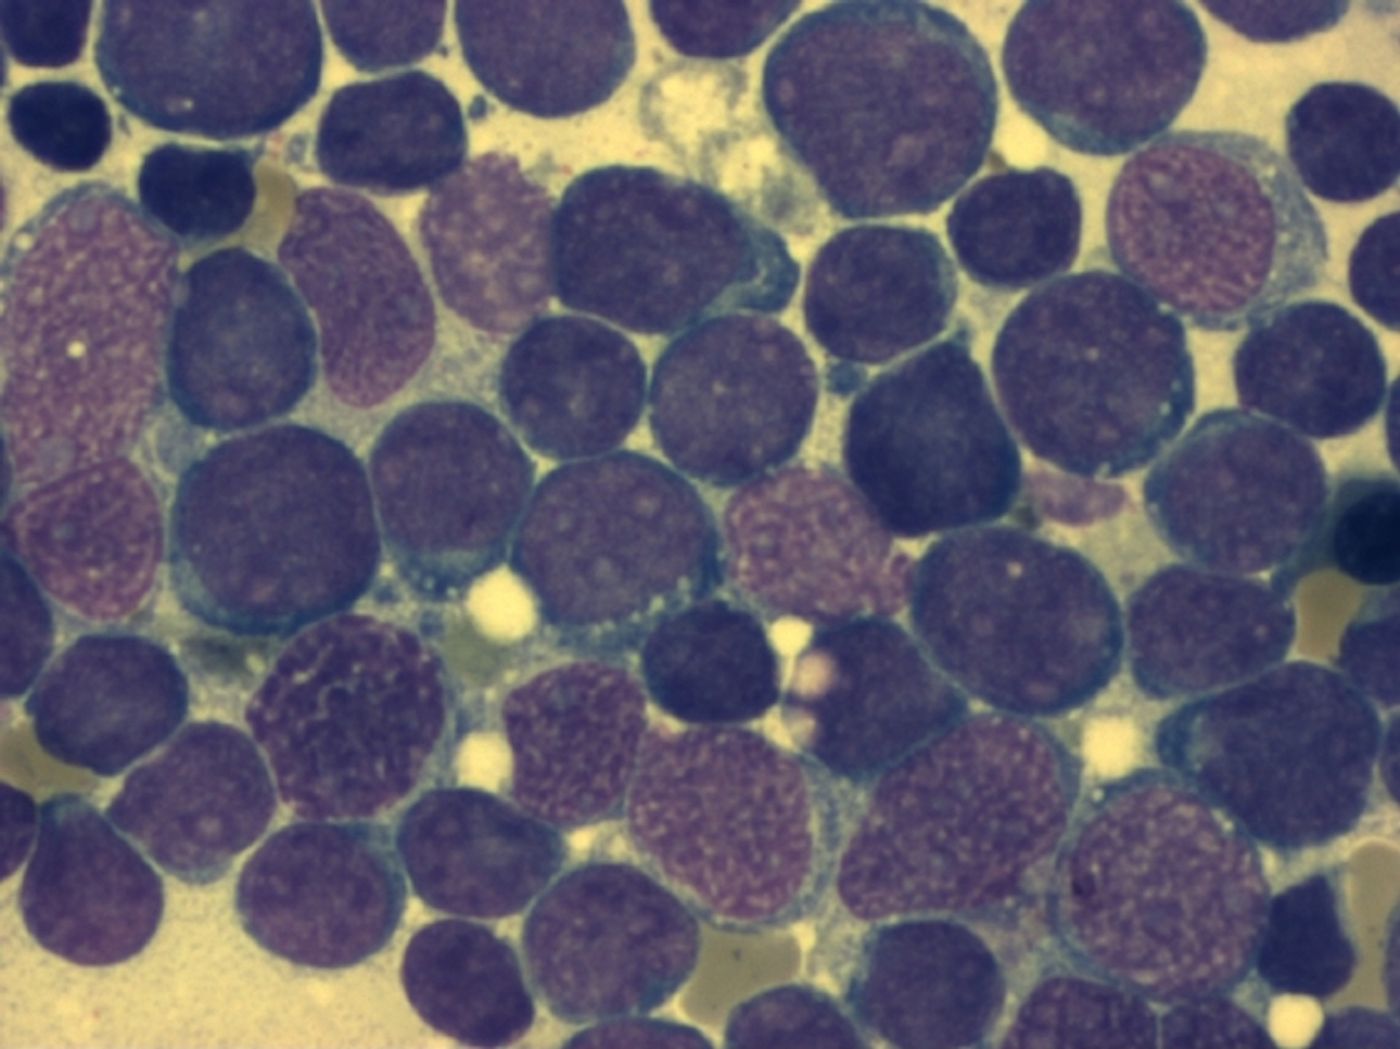 Bone marrow smear (large magnification) from a patient with acute lymphoblastic leukemia / Credit: WikimediaCommons/Furfur